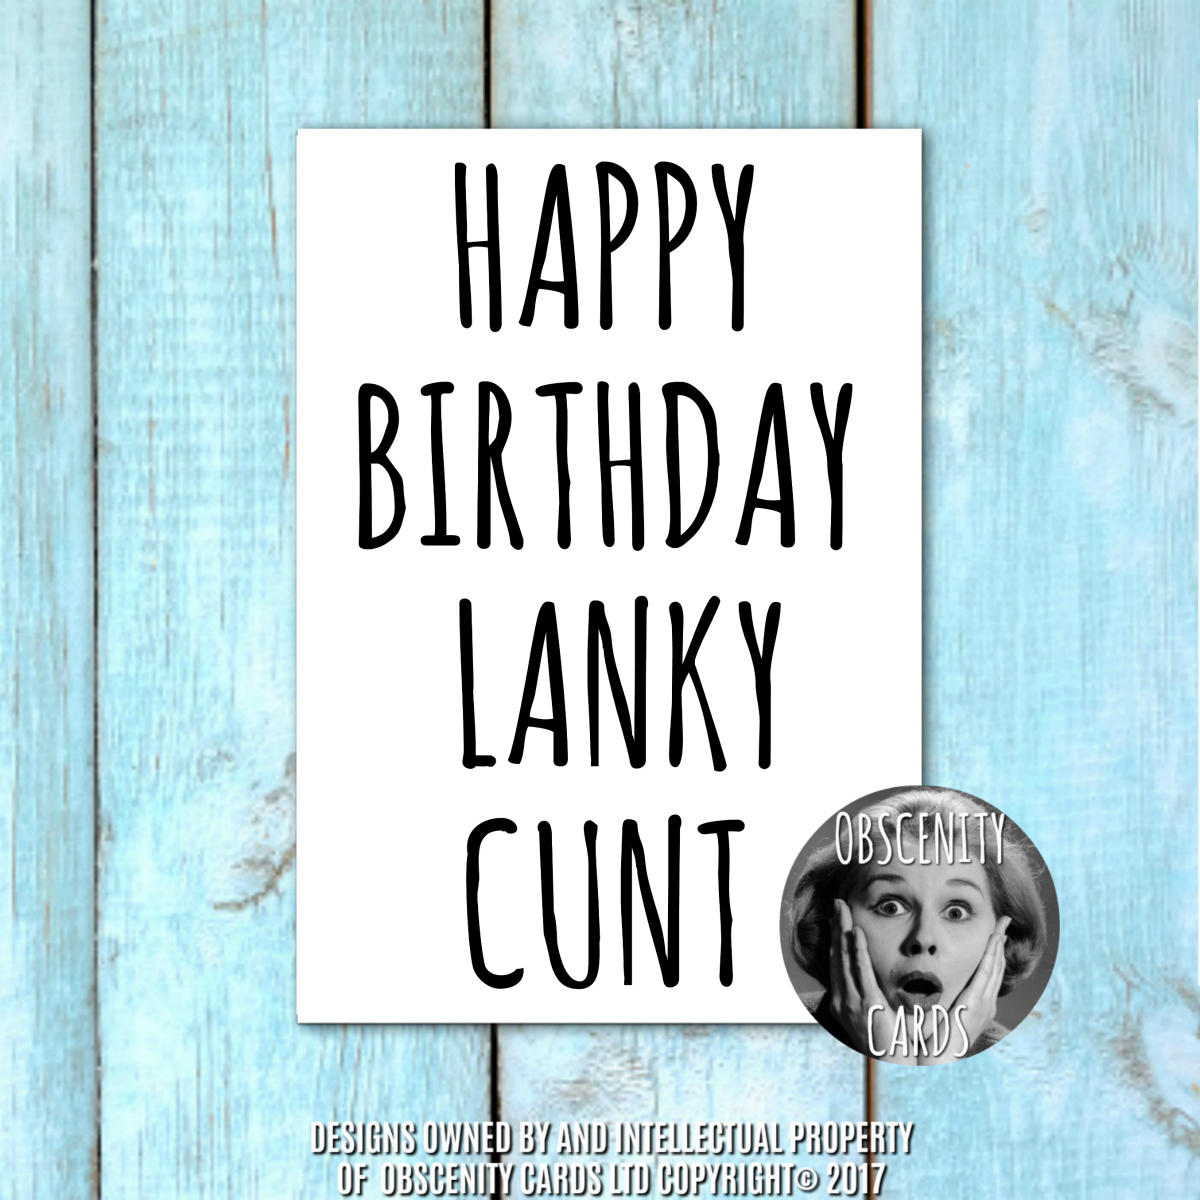 Funny birthday lanky cunt card. Obscenity cards. Obscene Funny Cards, Pens, Party Hats, Key rings, Magnets, Wine Bags, Lighters & Loads More!